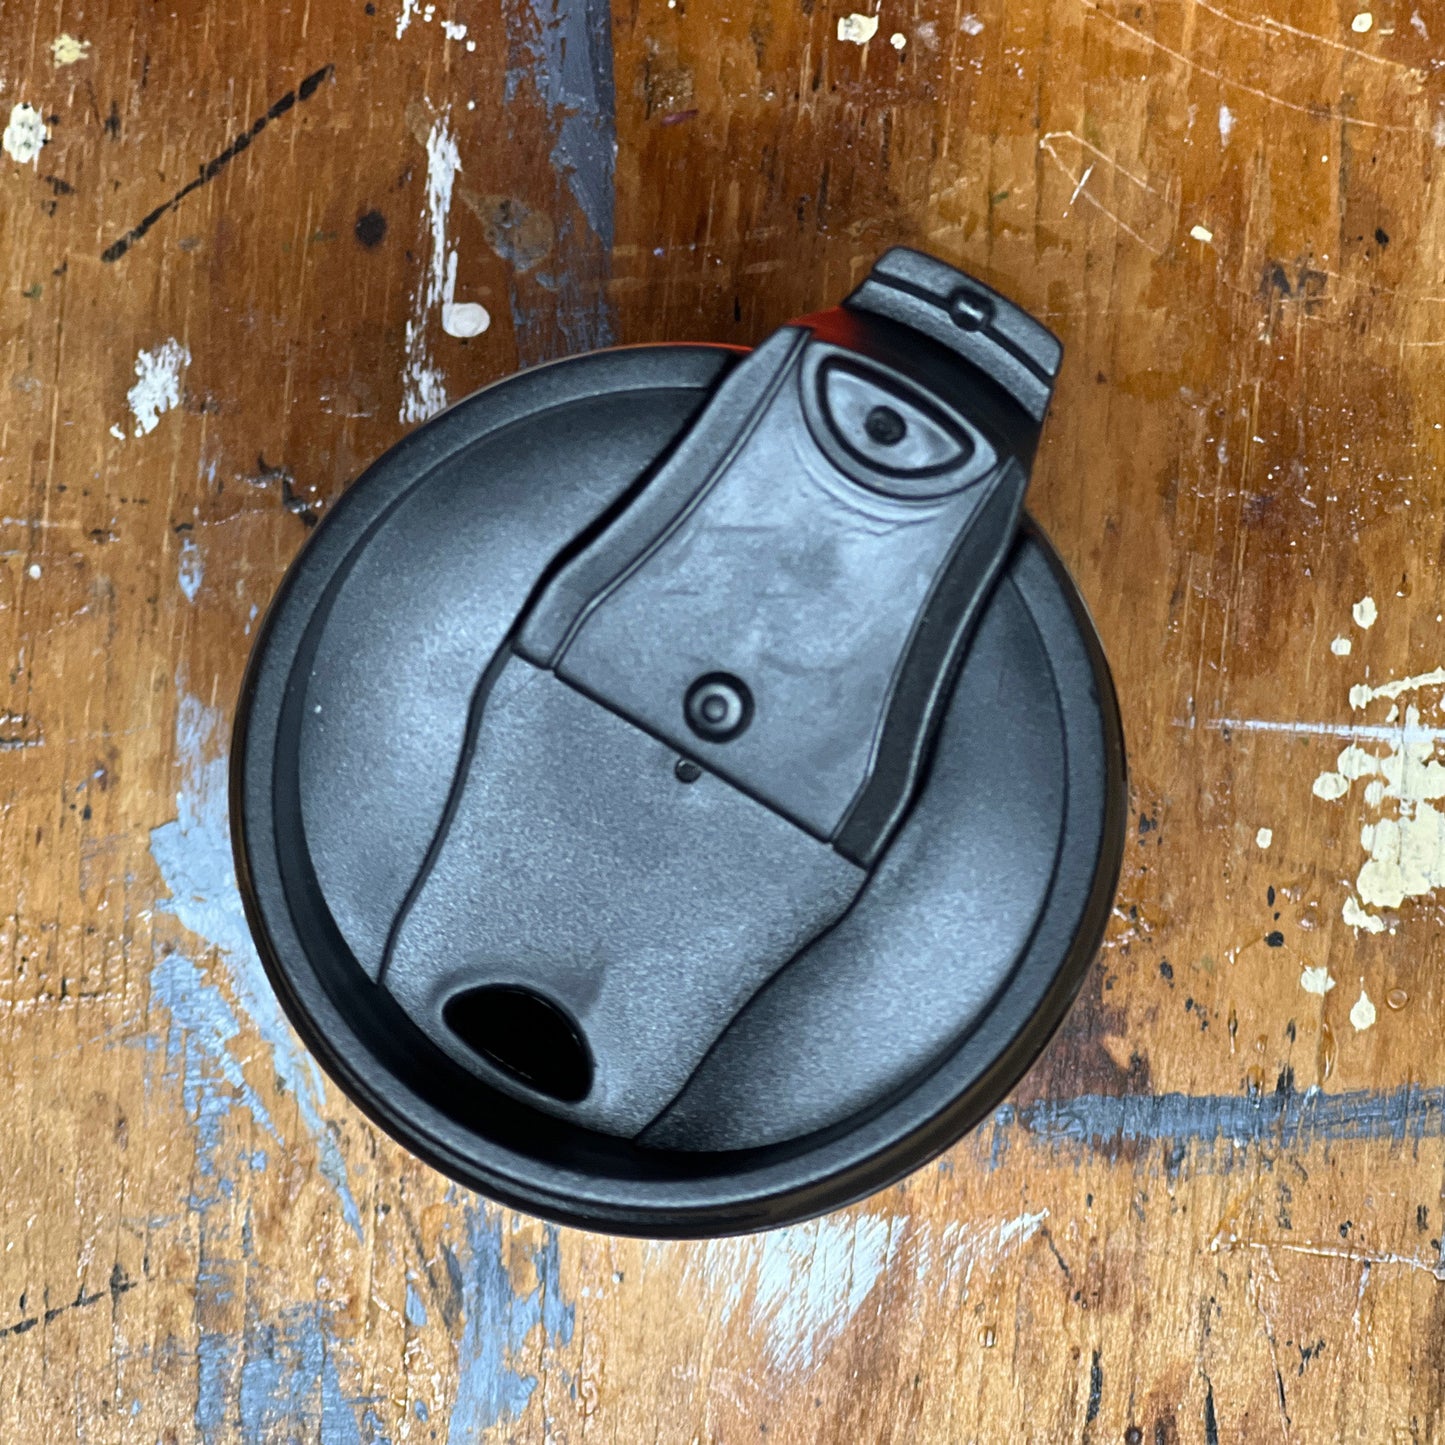 Showing the coffee tumbler's flip-top lid in the open position.